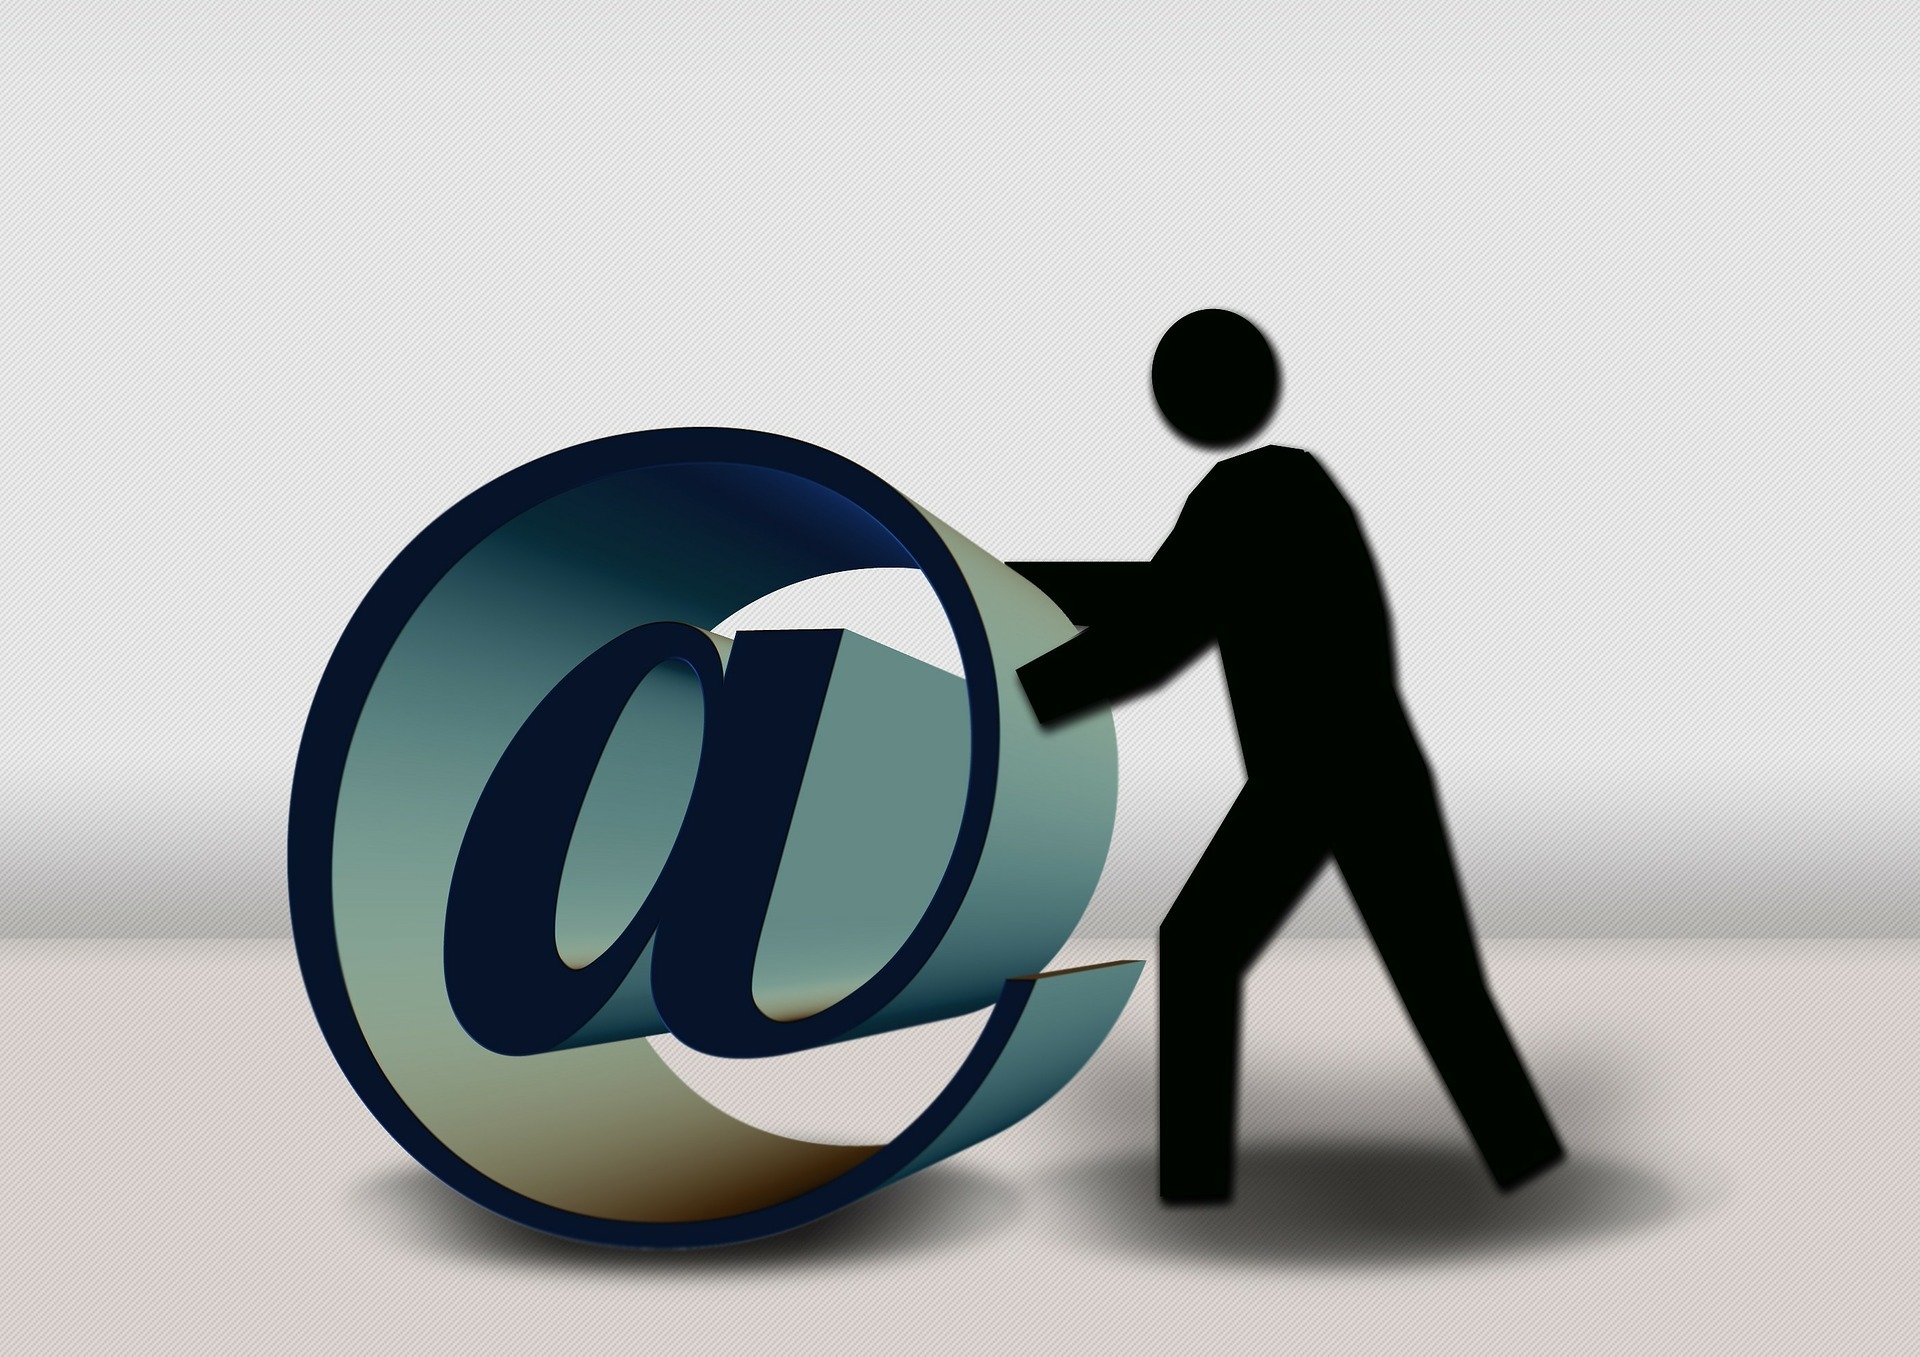 Your stored (sent and saved) email can tell future generations a great deal about you.